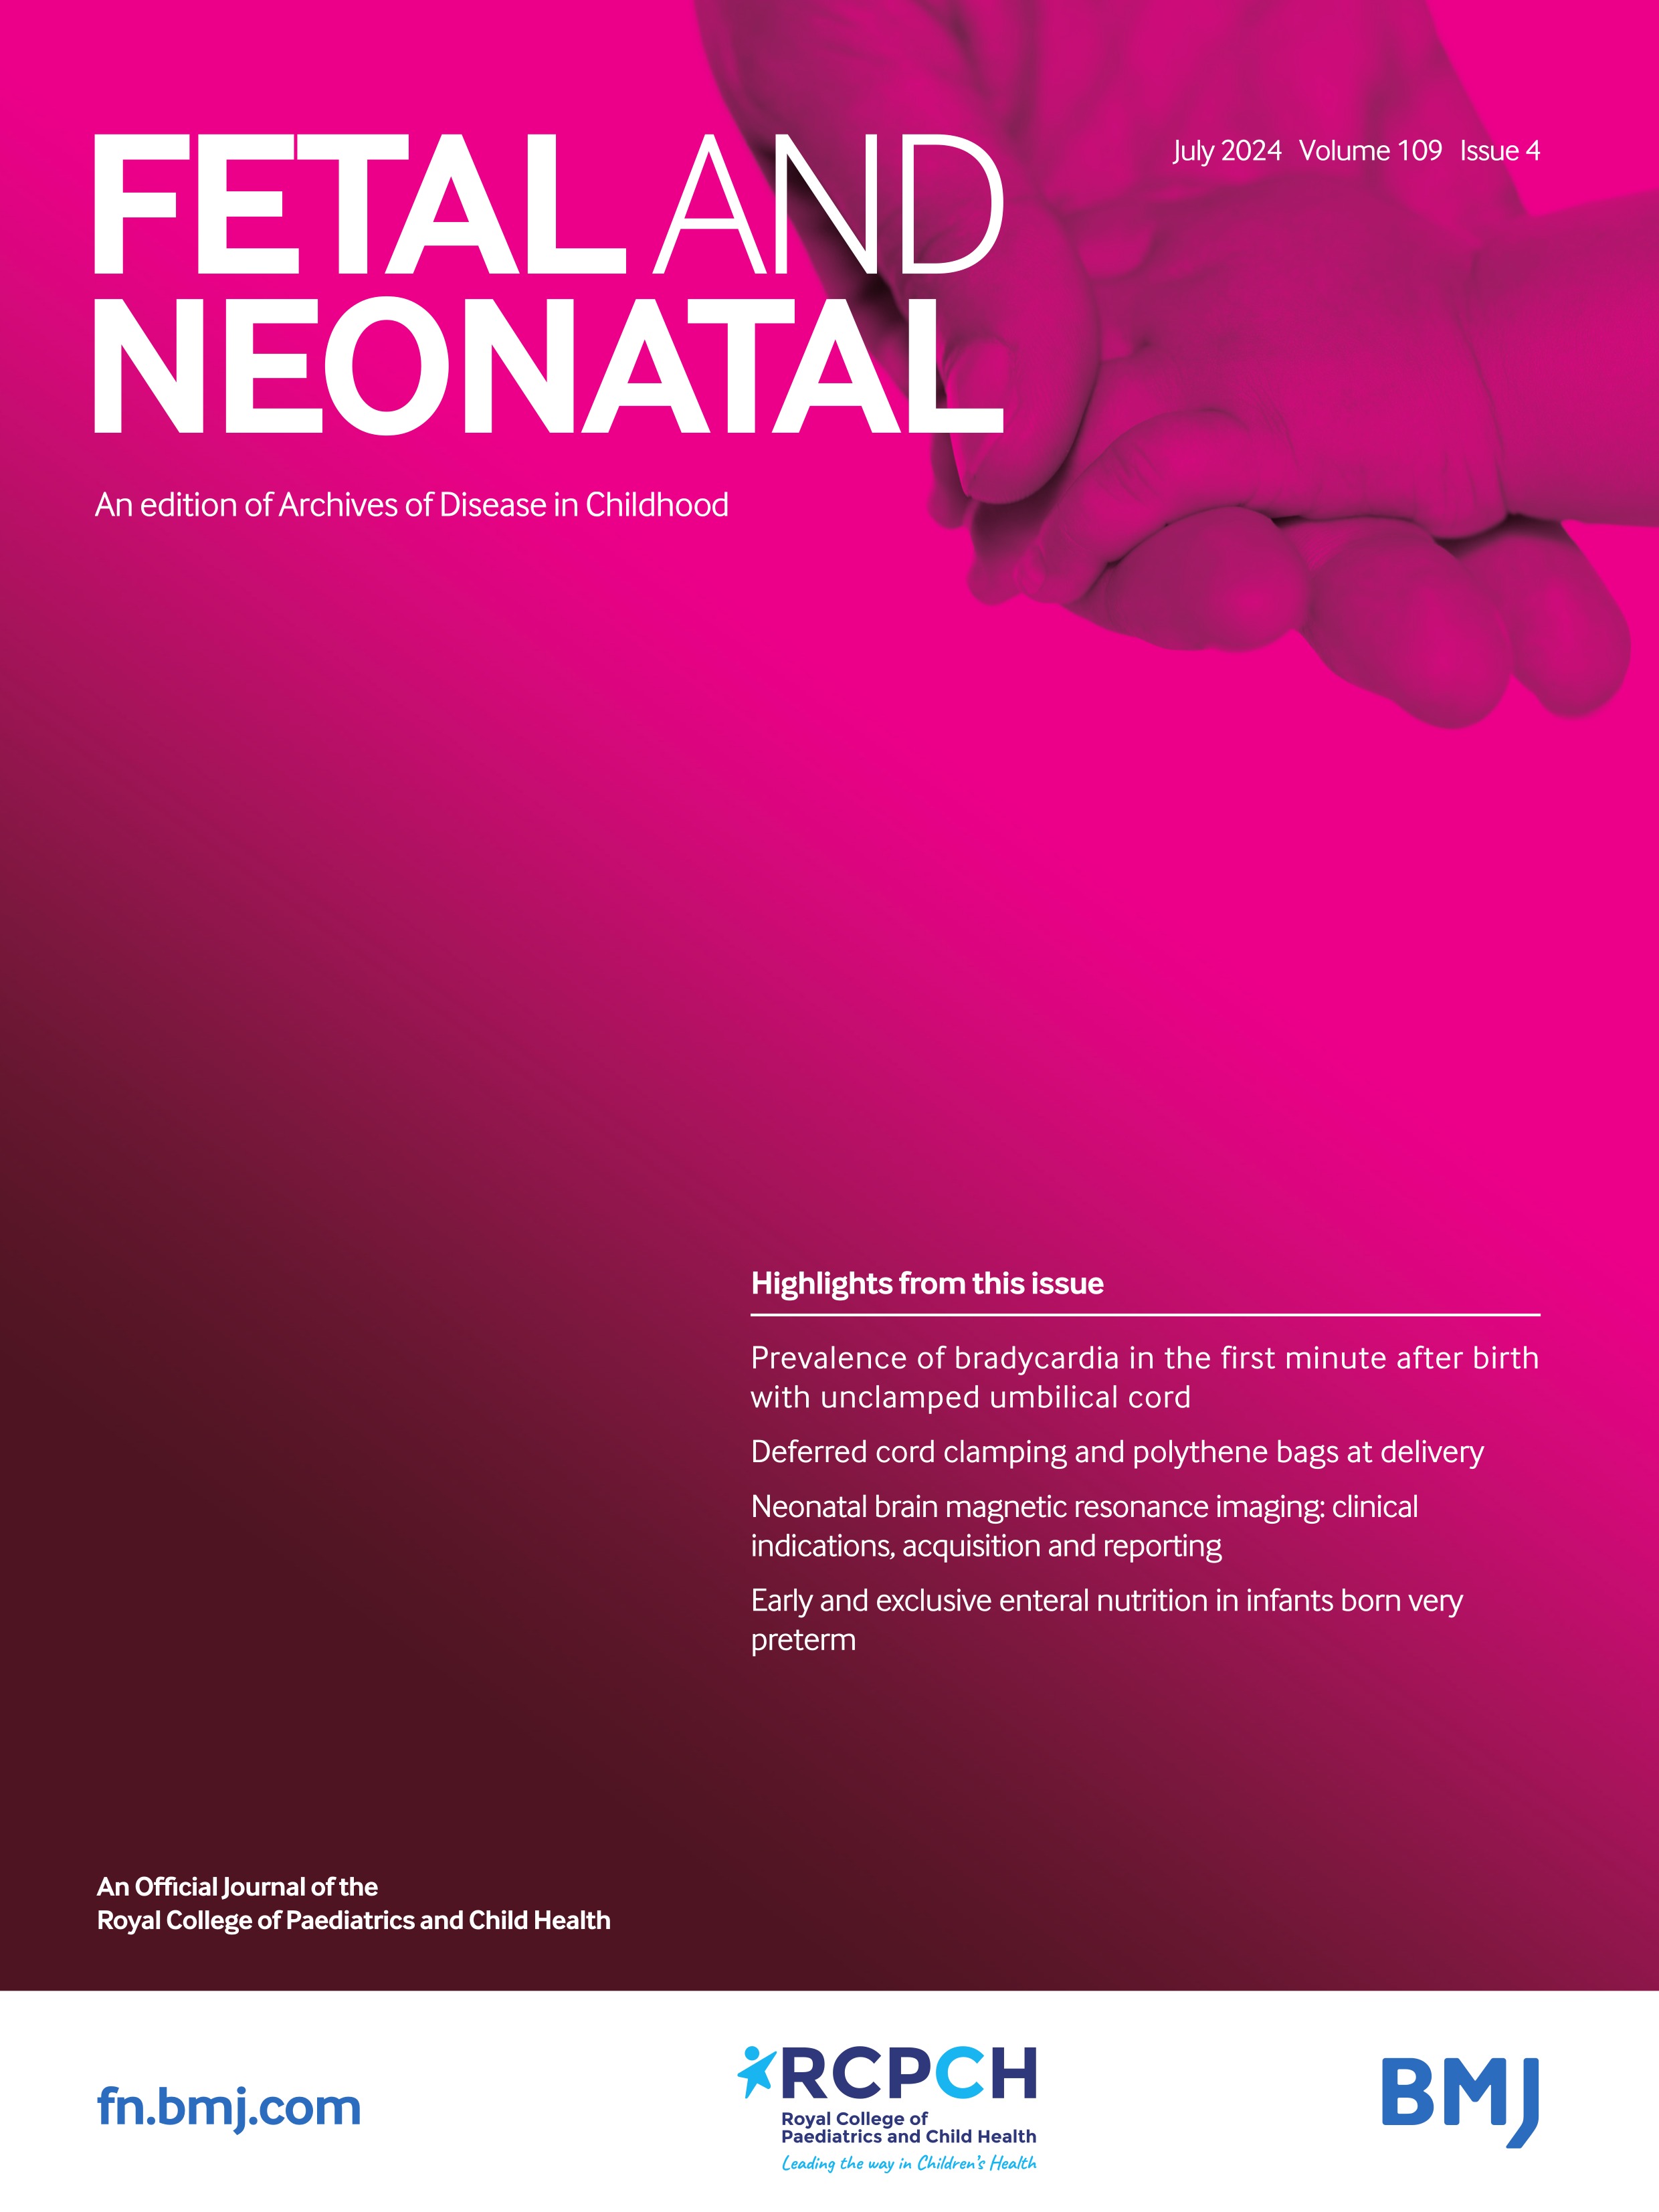 Doxapram for apnoea of prematurity and neurodevelopmental outcomes at age 5-6 years